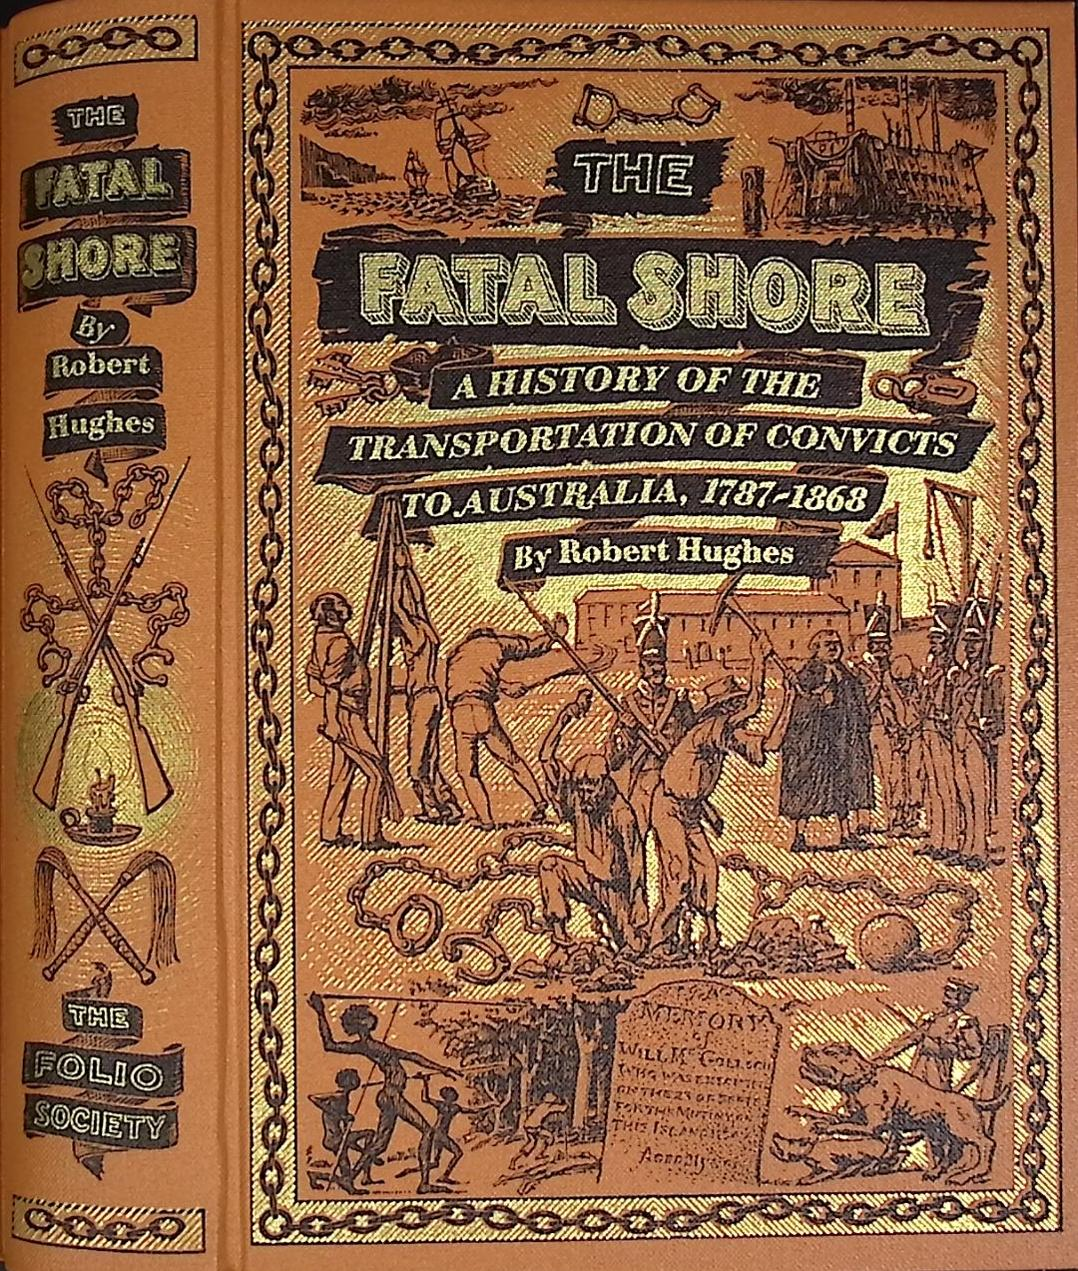 The Fatal Shore: A History of the Transportation of Convicts to Australia 1787 - 1868.